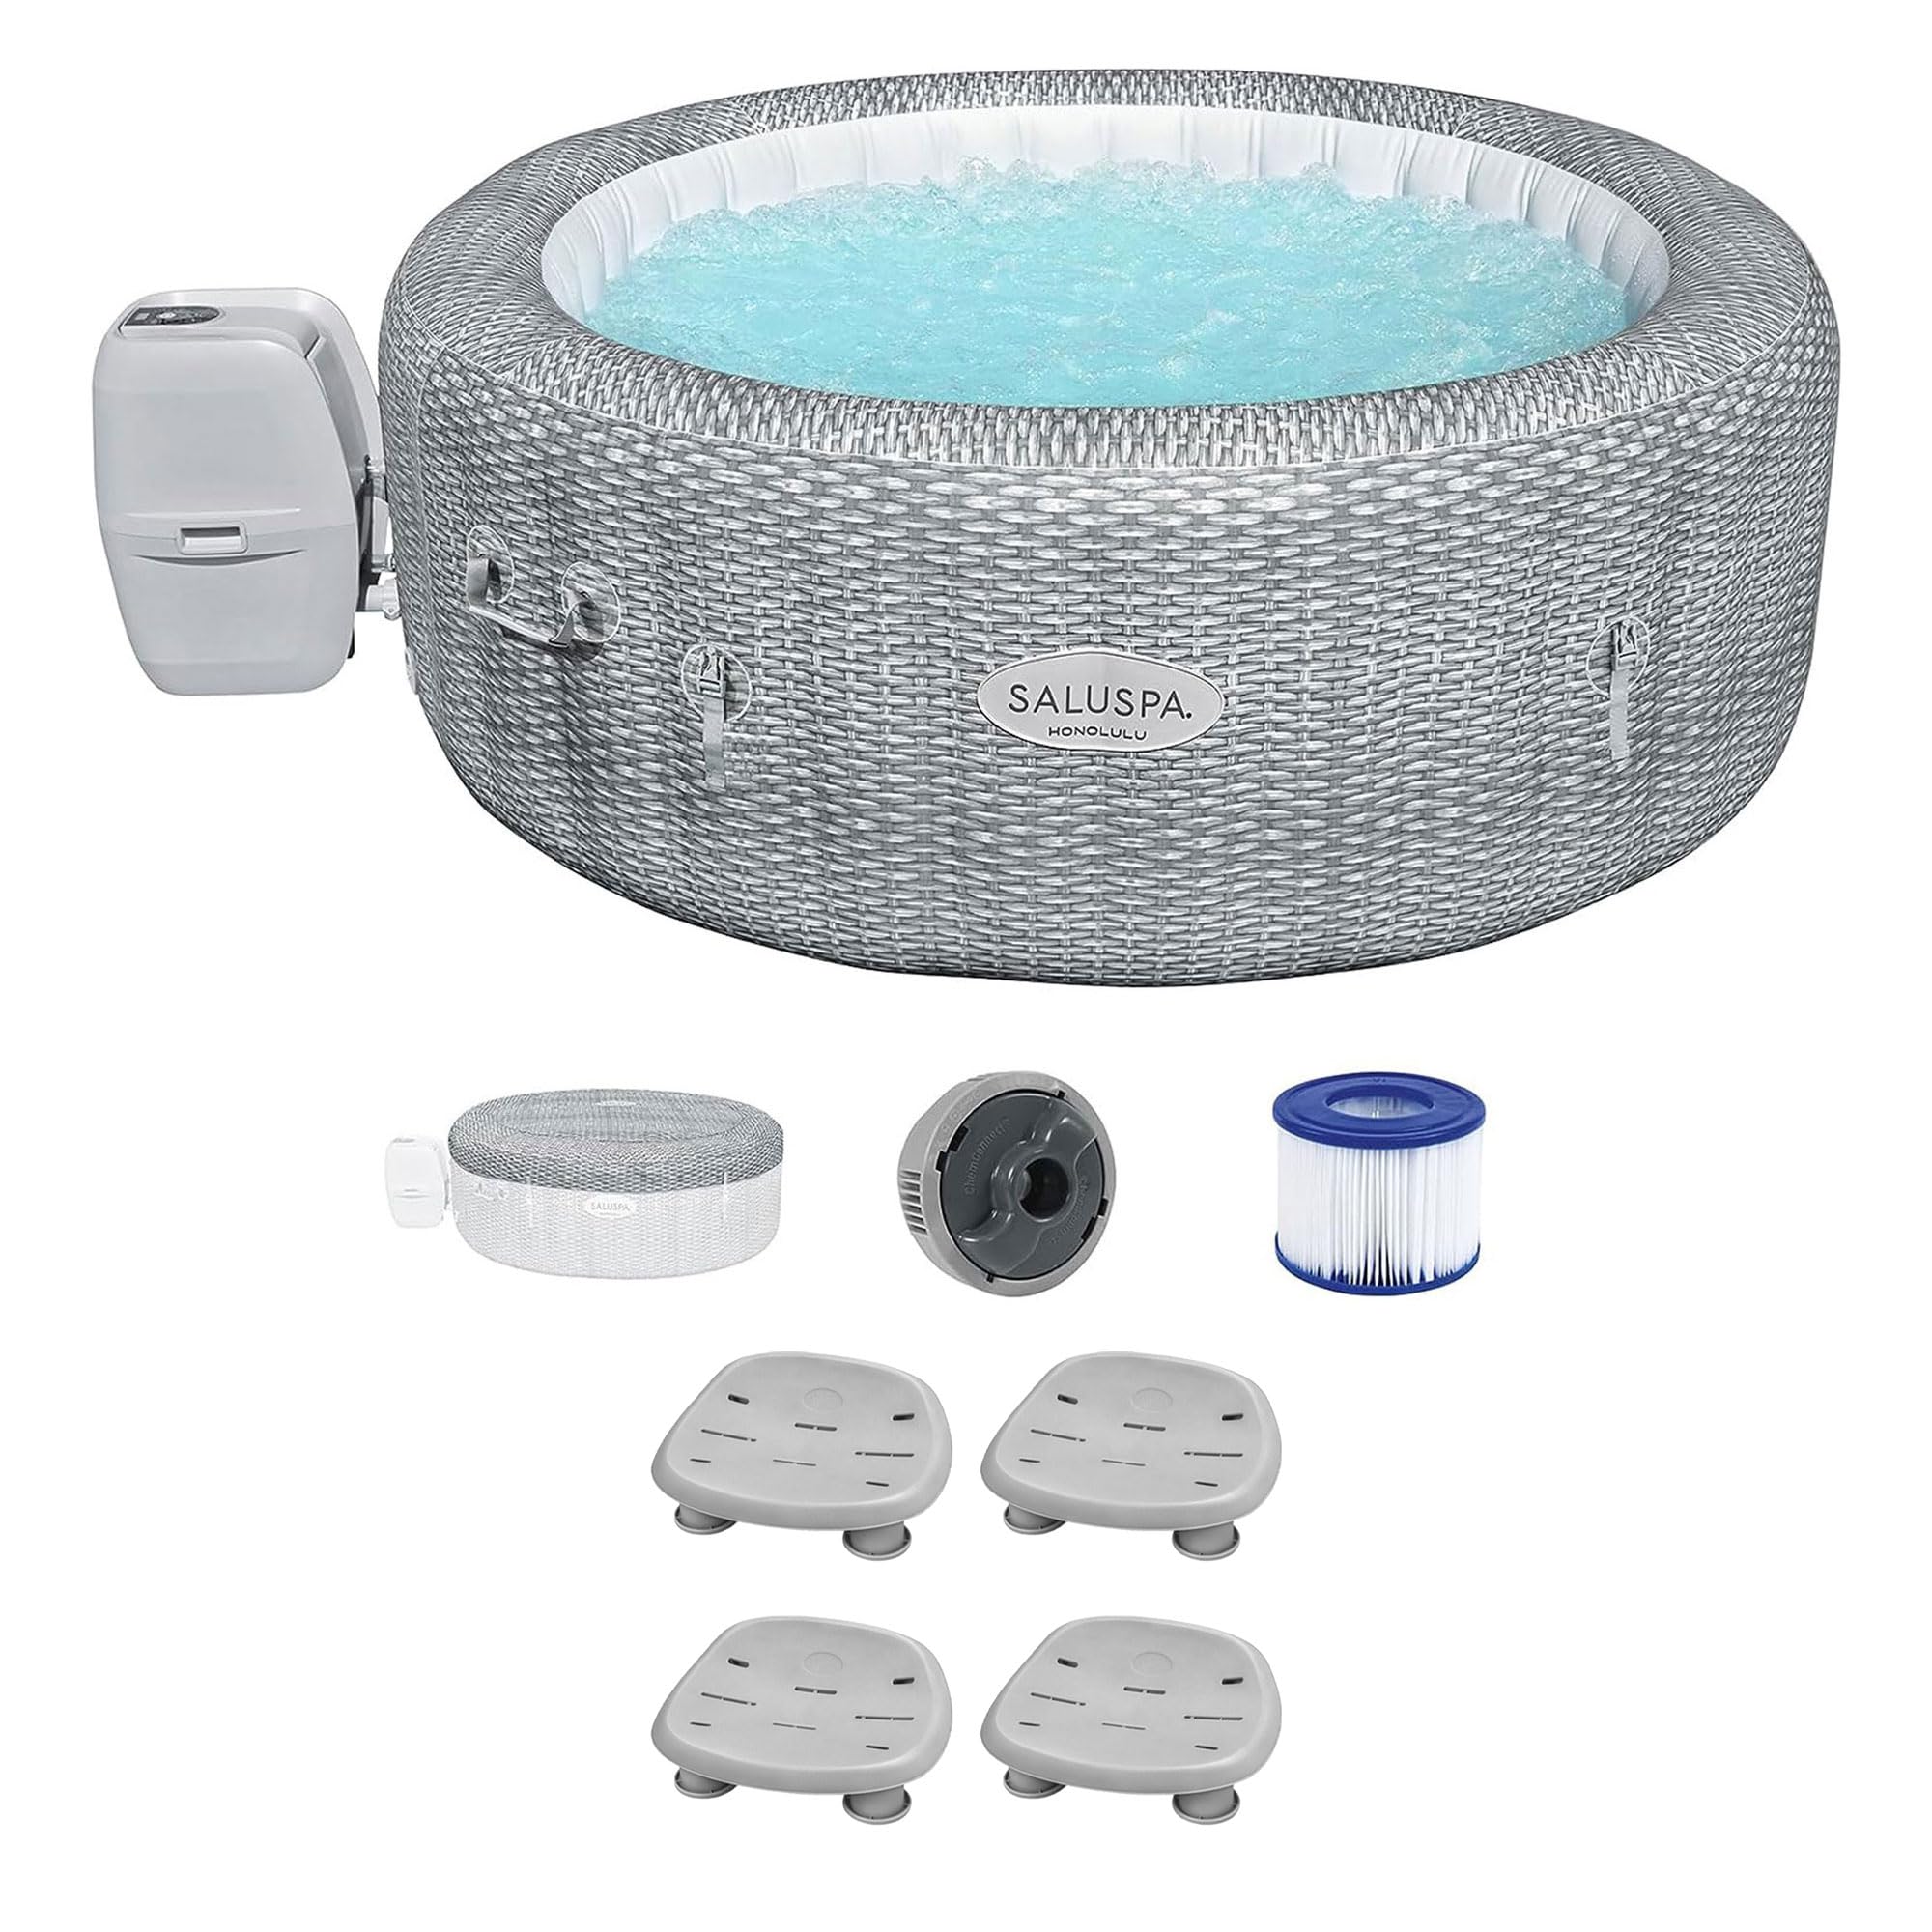 Bestway SaluSpa Honolulu AirJet Inflatable Hot Tub with 140 Soothing Jets with 4 Pack SaluSpa Underwater Non Slip Pool & Spa Seat with Adjustable Legs